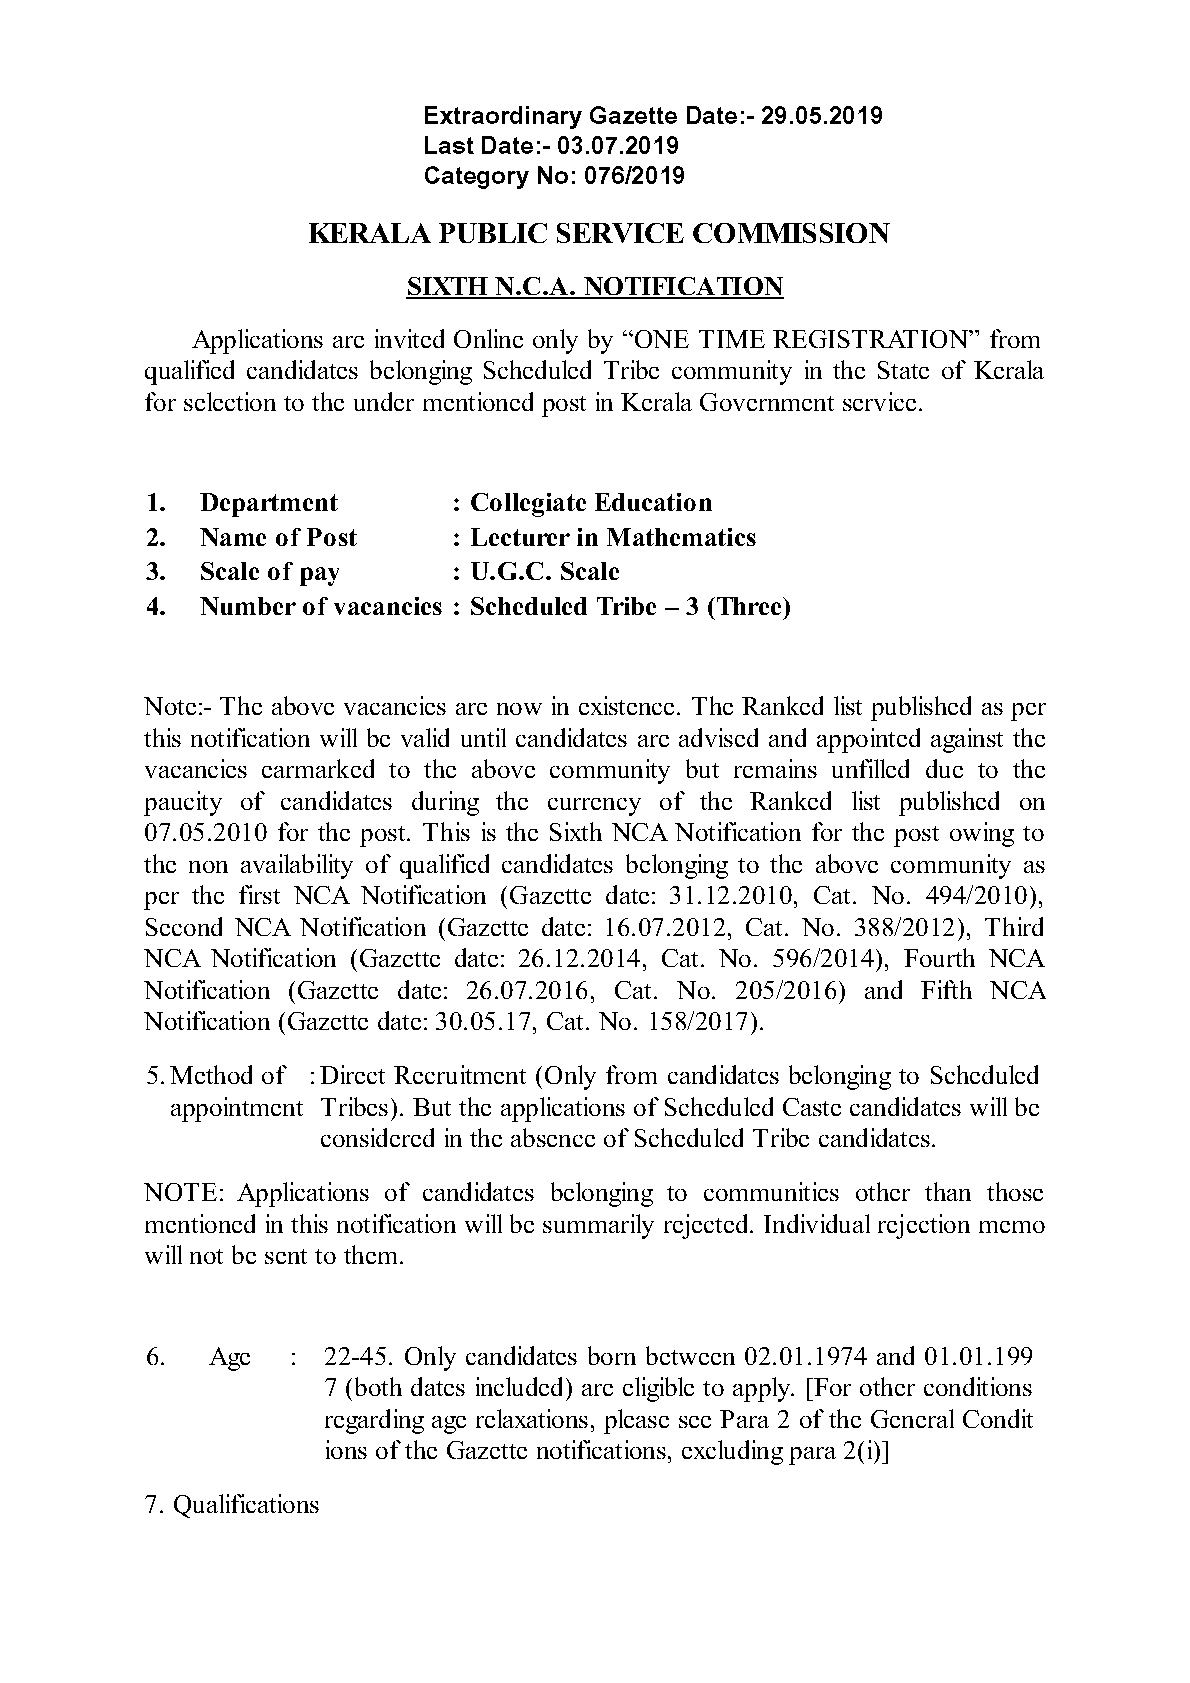 KPSC Lecturer in Mathematics from Scheduled Tribe - Notification Image 1